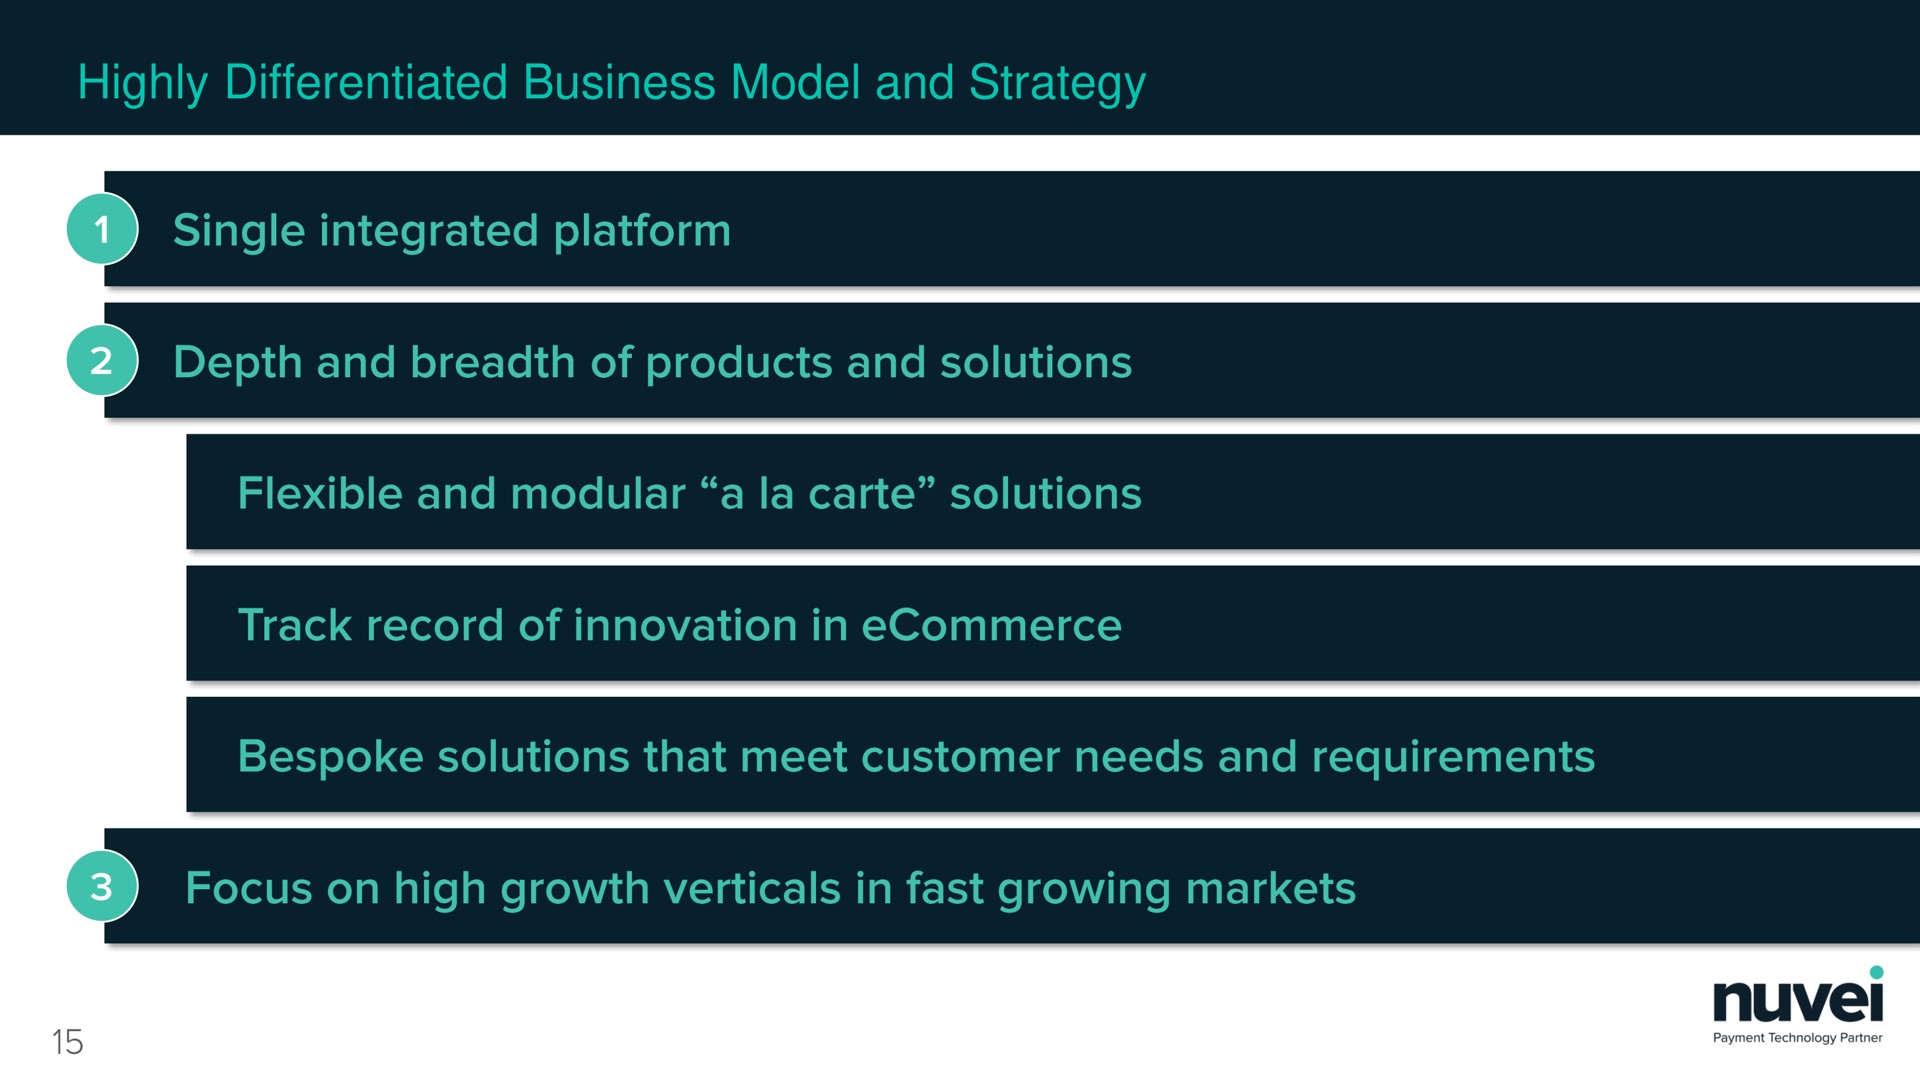 highly differentiated business model and strategy single integrated platform depth breadth of products solutions flexible modular a carte solutions track record of innovation in bespoke solutions that meet customer needs requirements focus on high growth verticals in fast growing markets | Nuvei